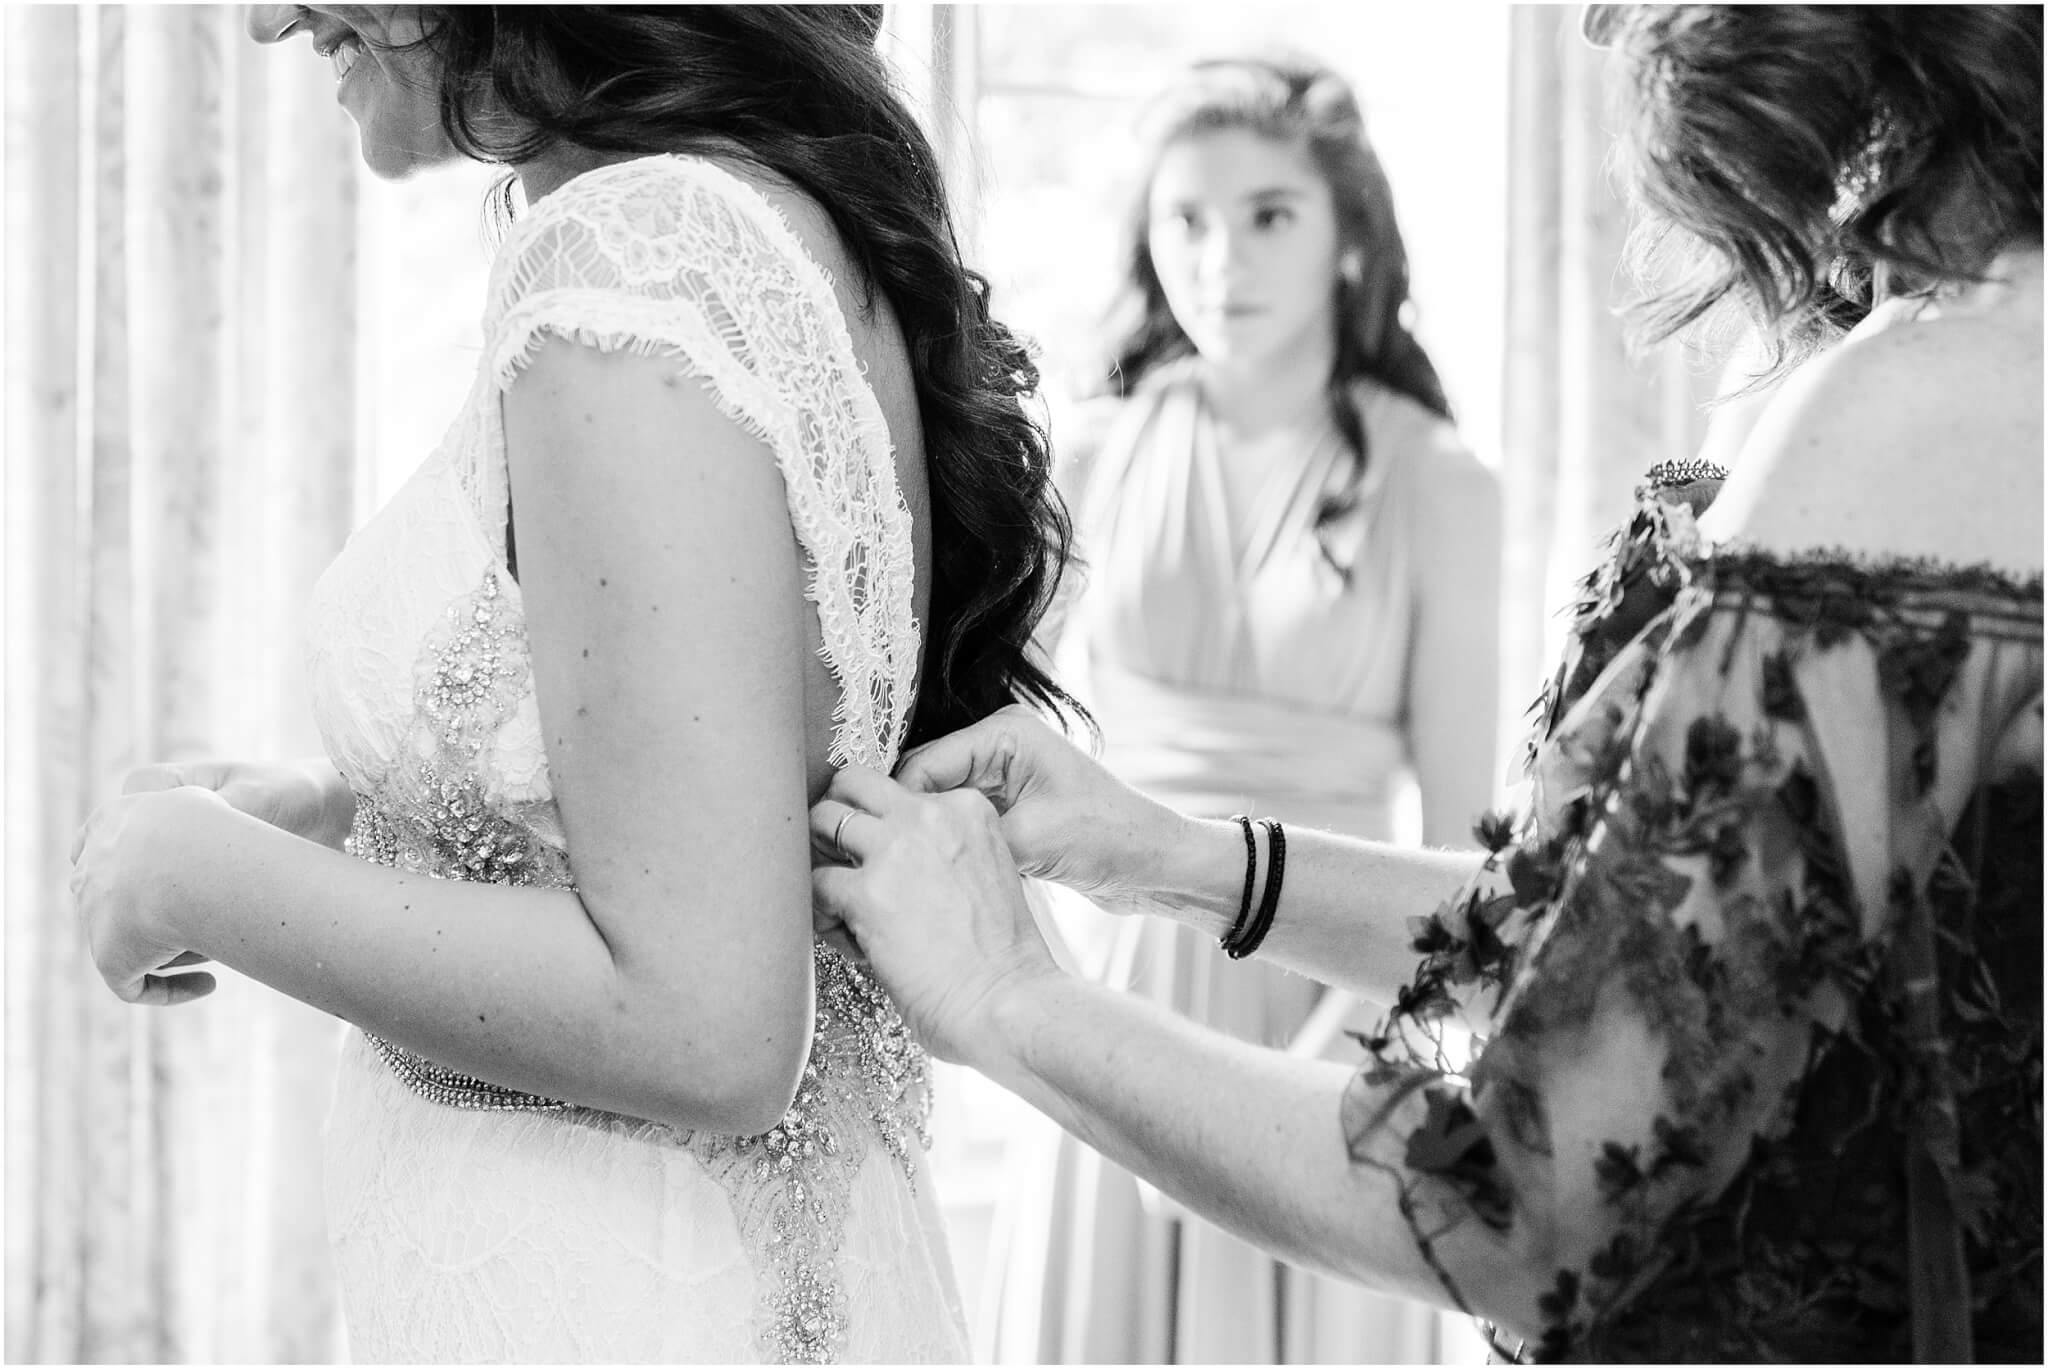 Mom helping brides get ready, sister looking on